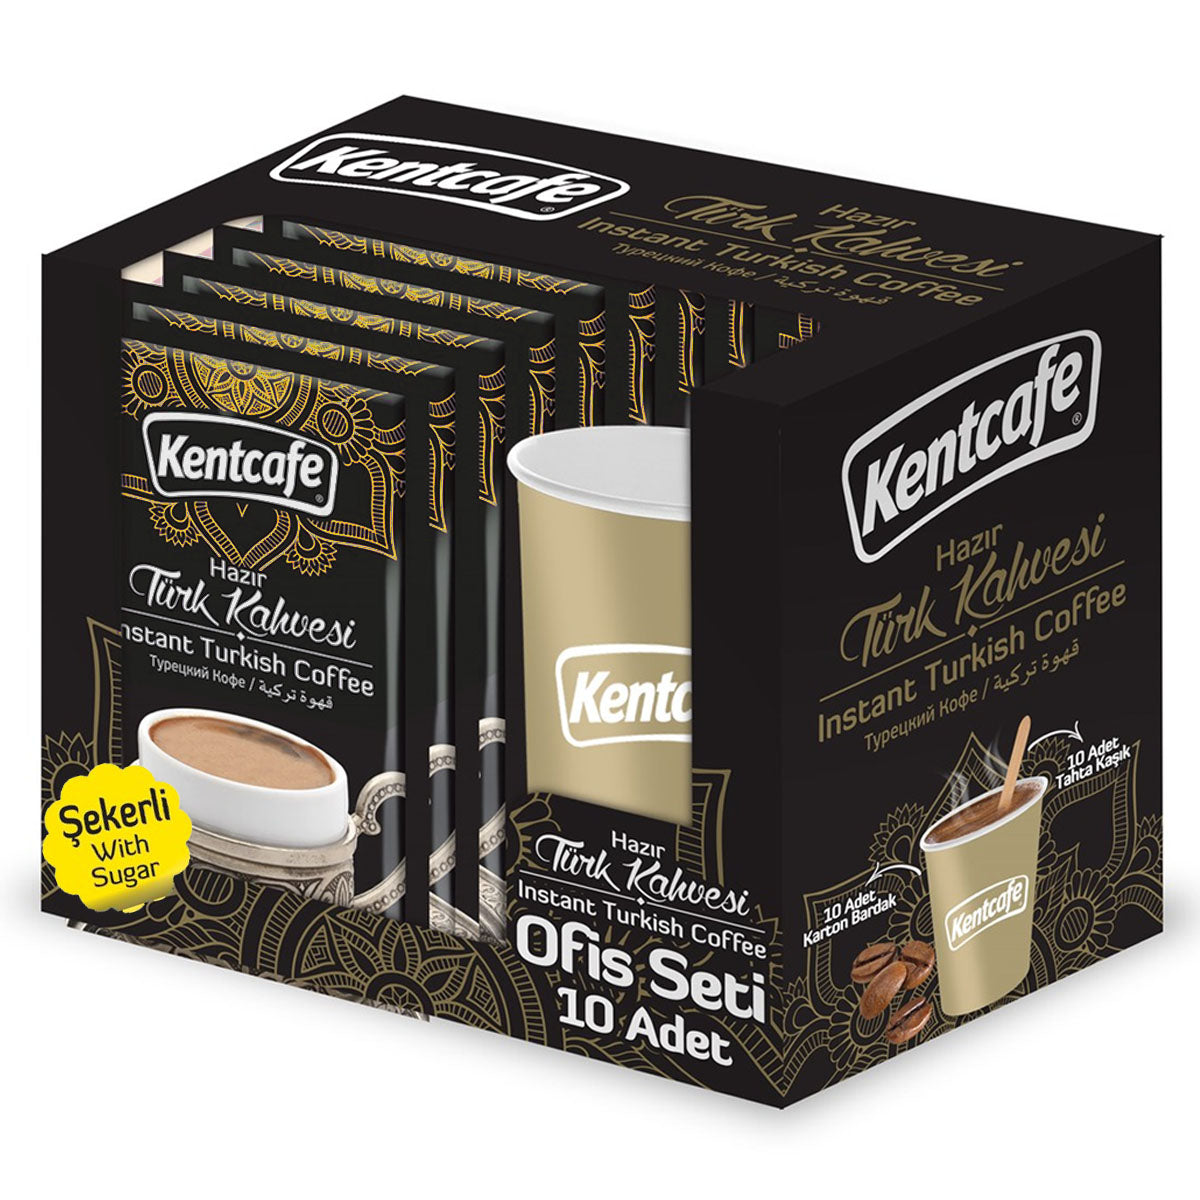 Kentcafe - Instant Turkish Coffee with Sugar (Disposable Cup Set) - 10x11g - Continental Food Store